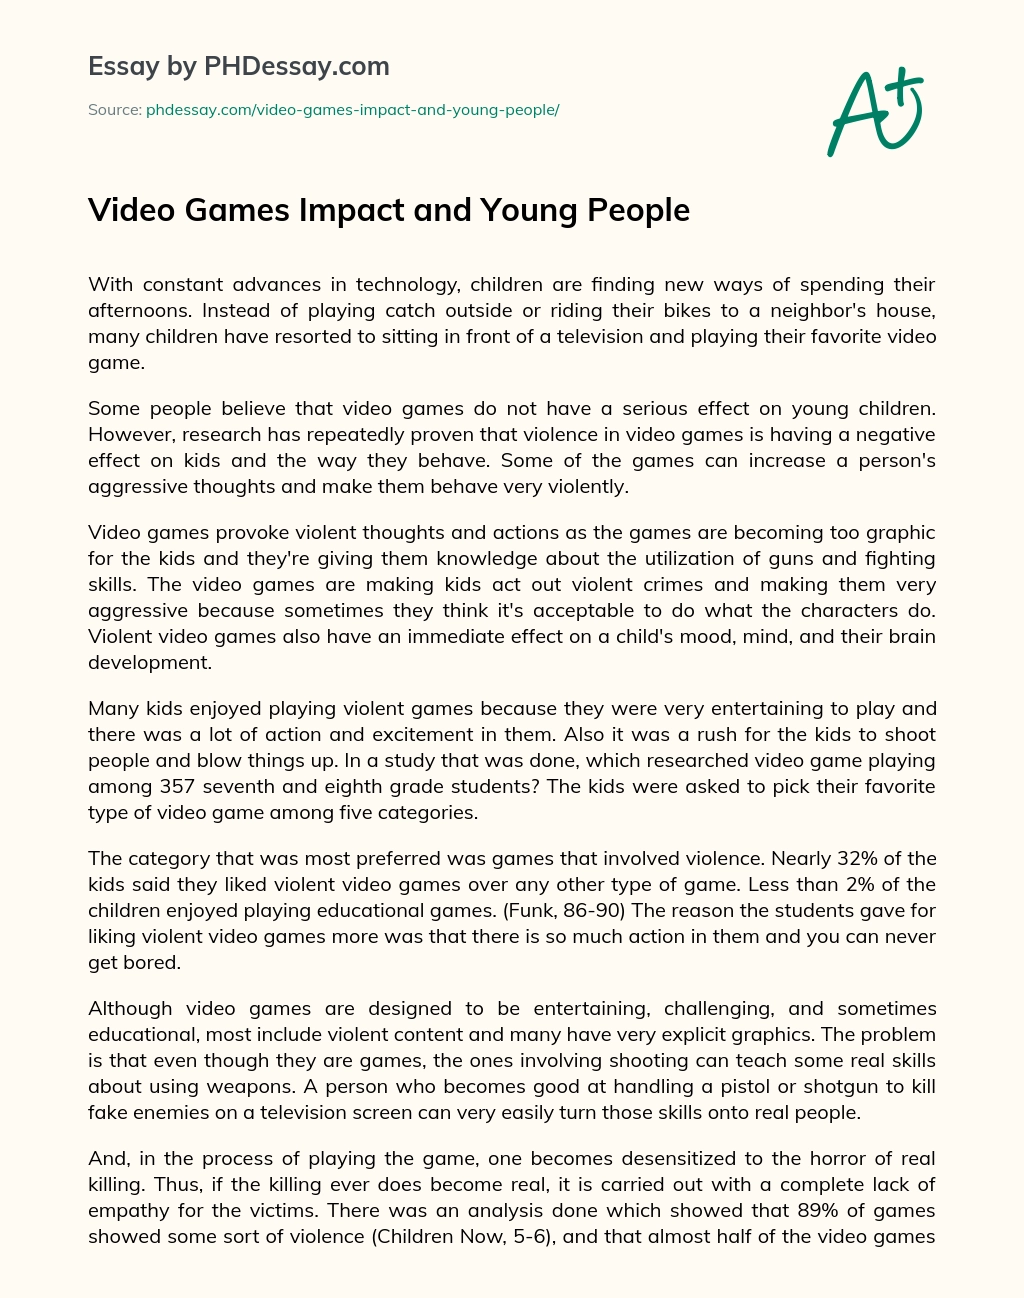 Video Games Impact and Young People essay